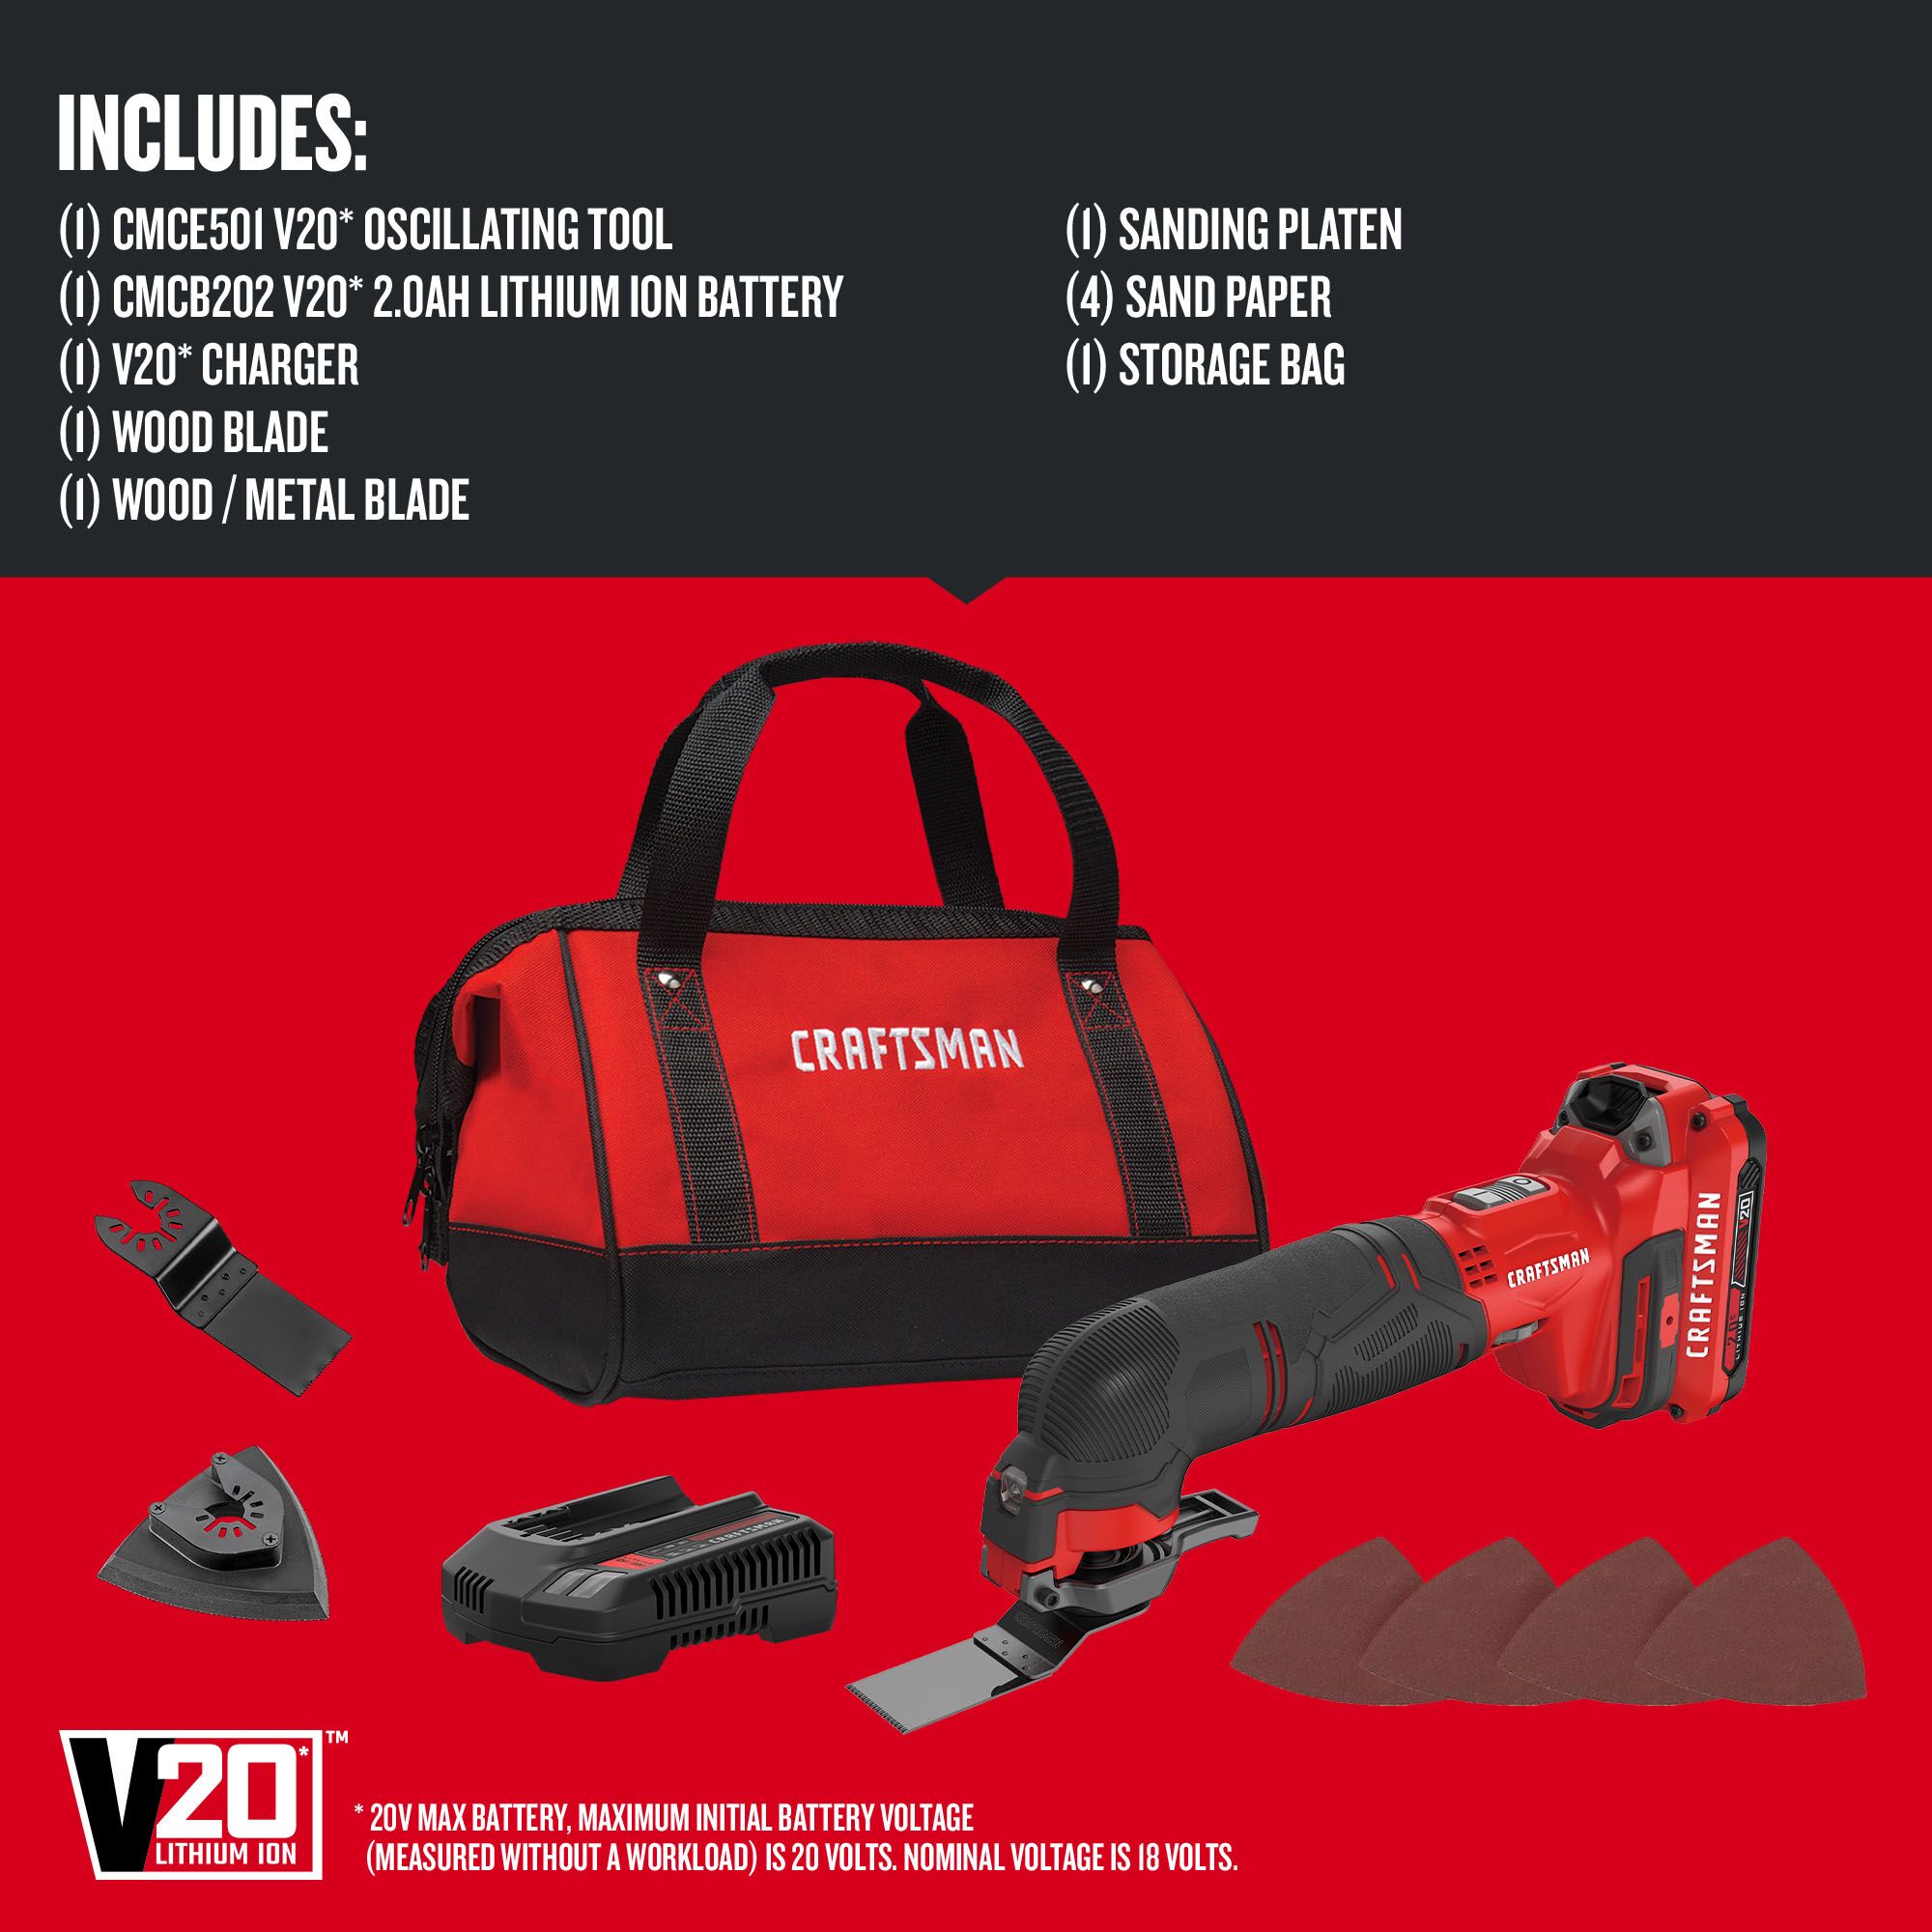 Graphic of CRAFTSMAN Oscillating Multi-Tools highlighting product features